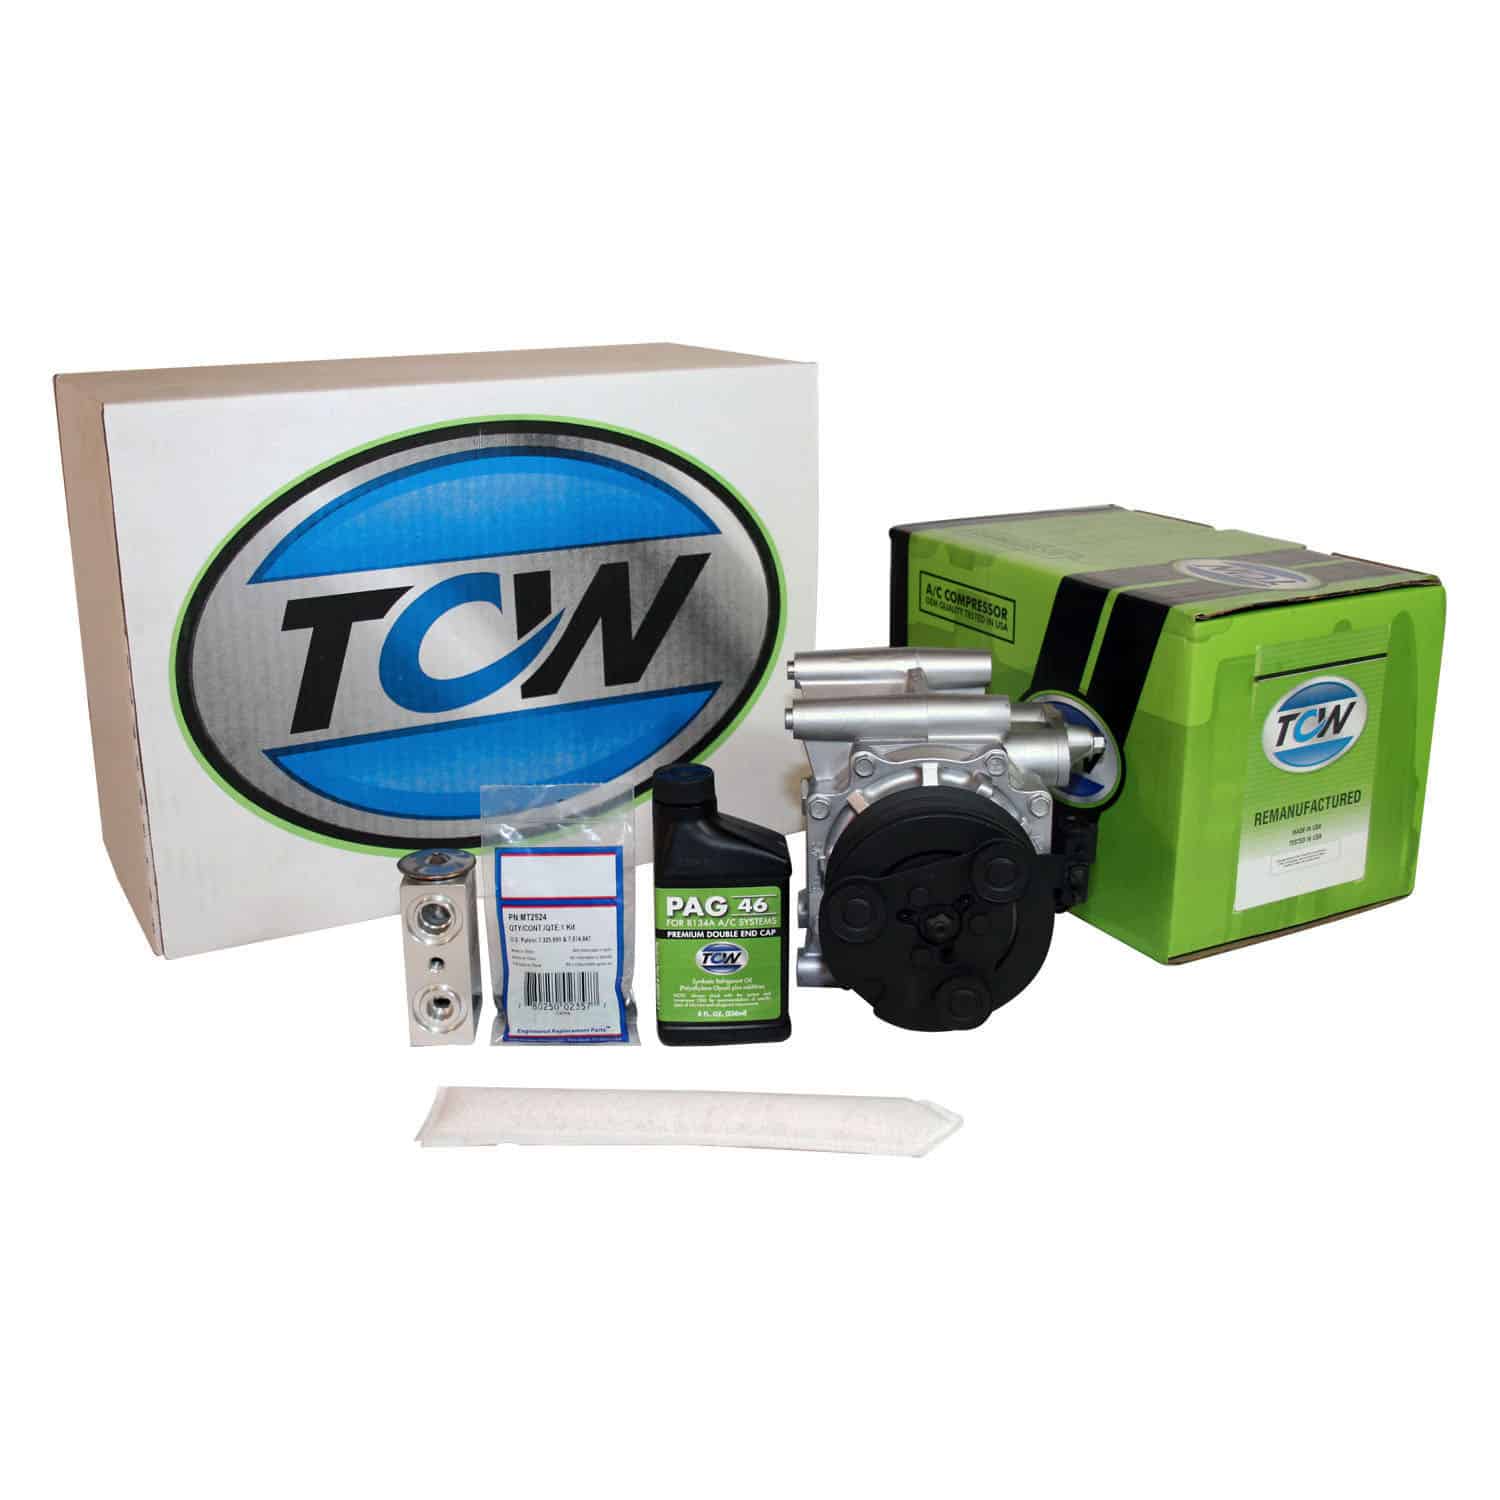 TCW Vehicle A/C Kit K1000249R Remanufactured Product Image field_60b6a13a6e67c